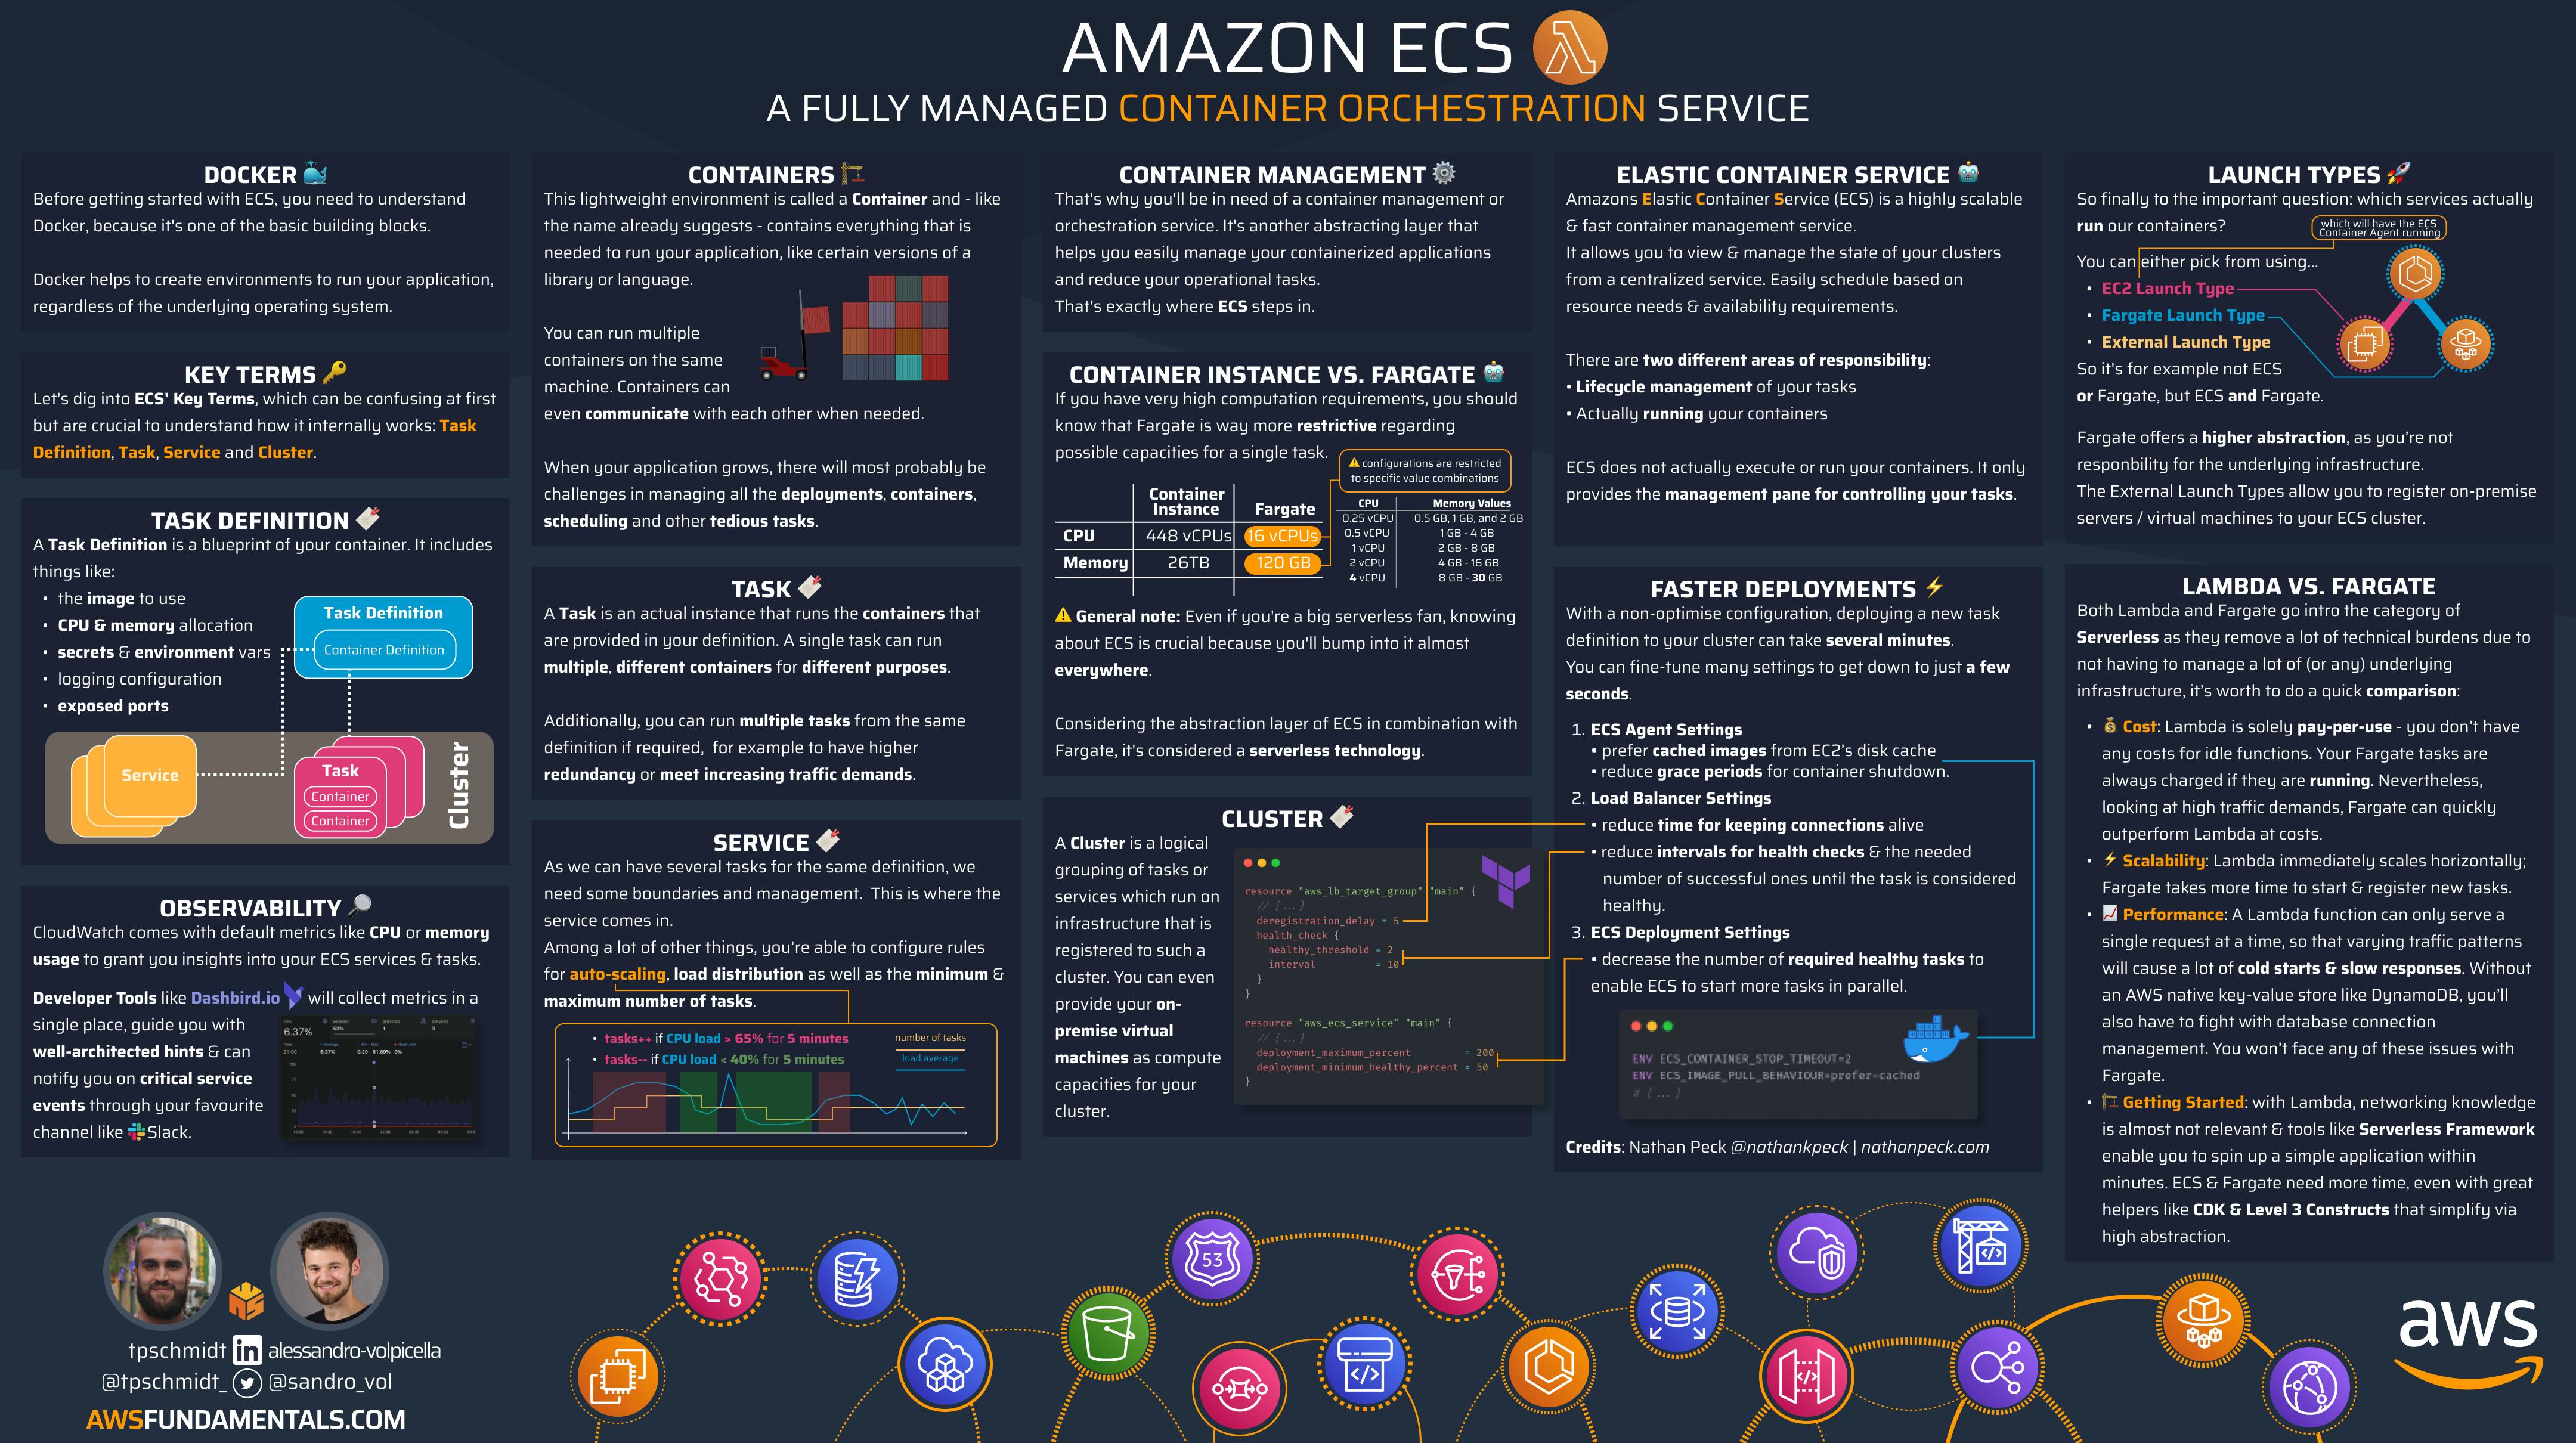 Amazon ECS - A fully managed container orchestration service.